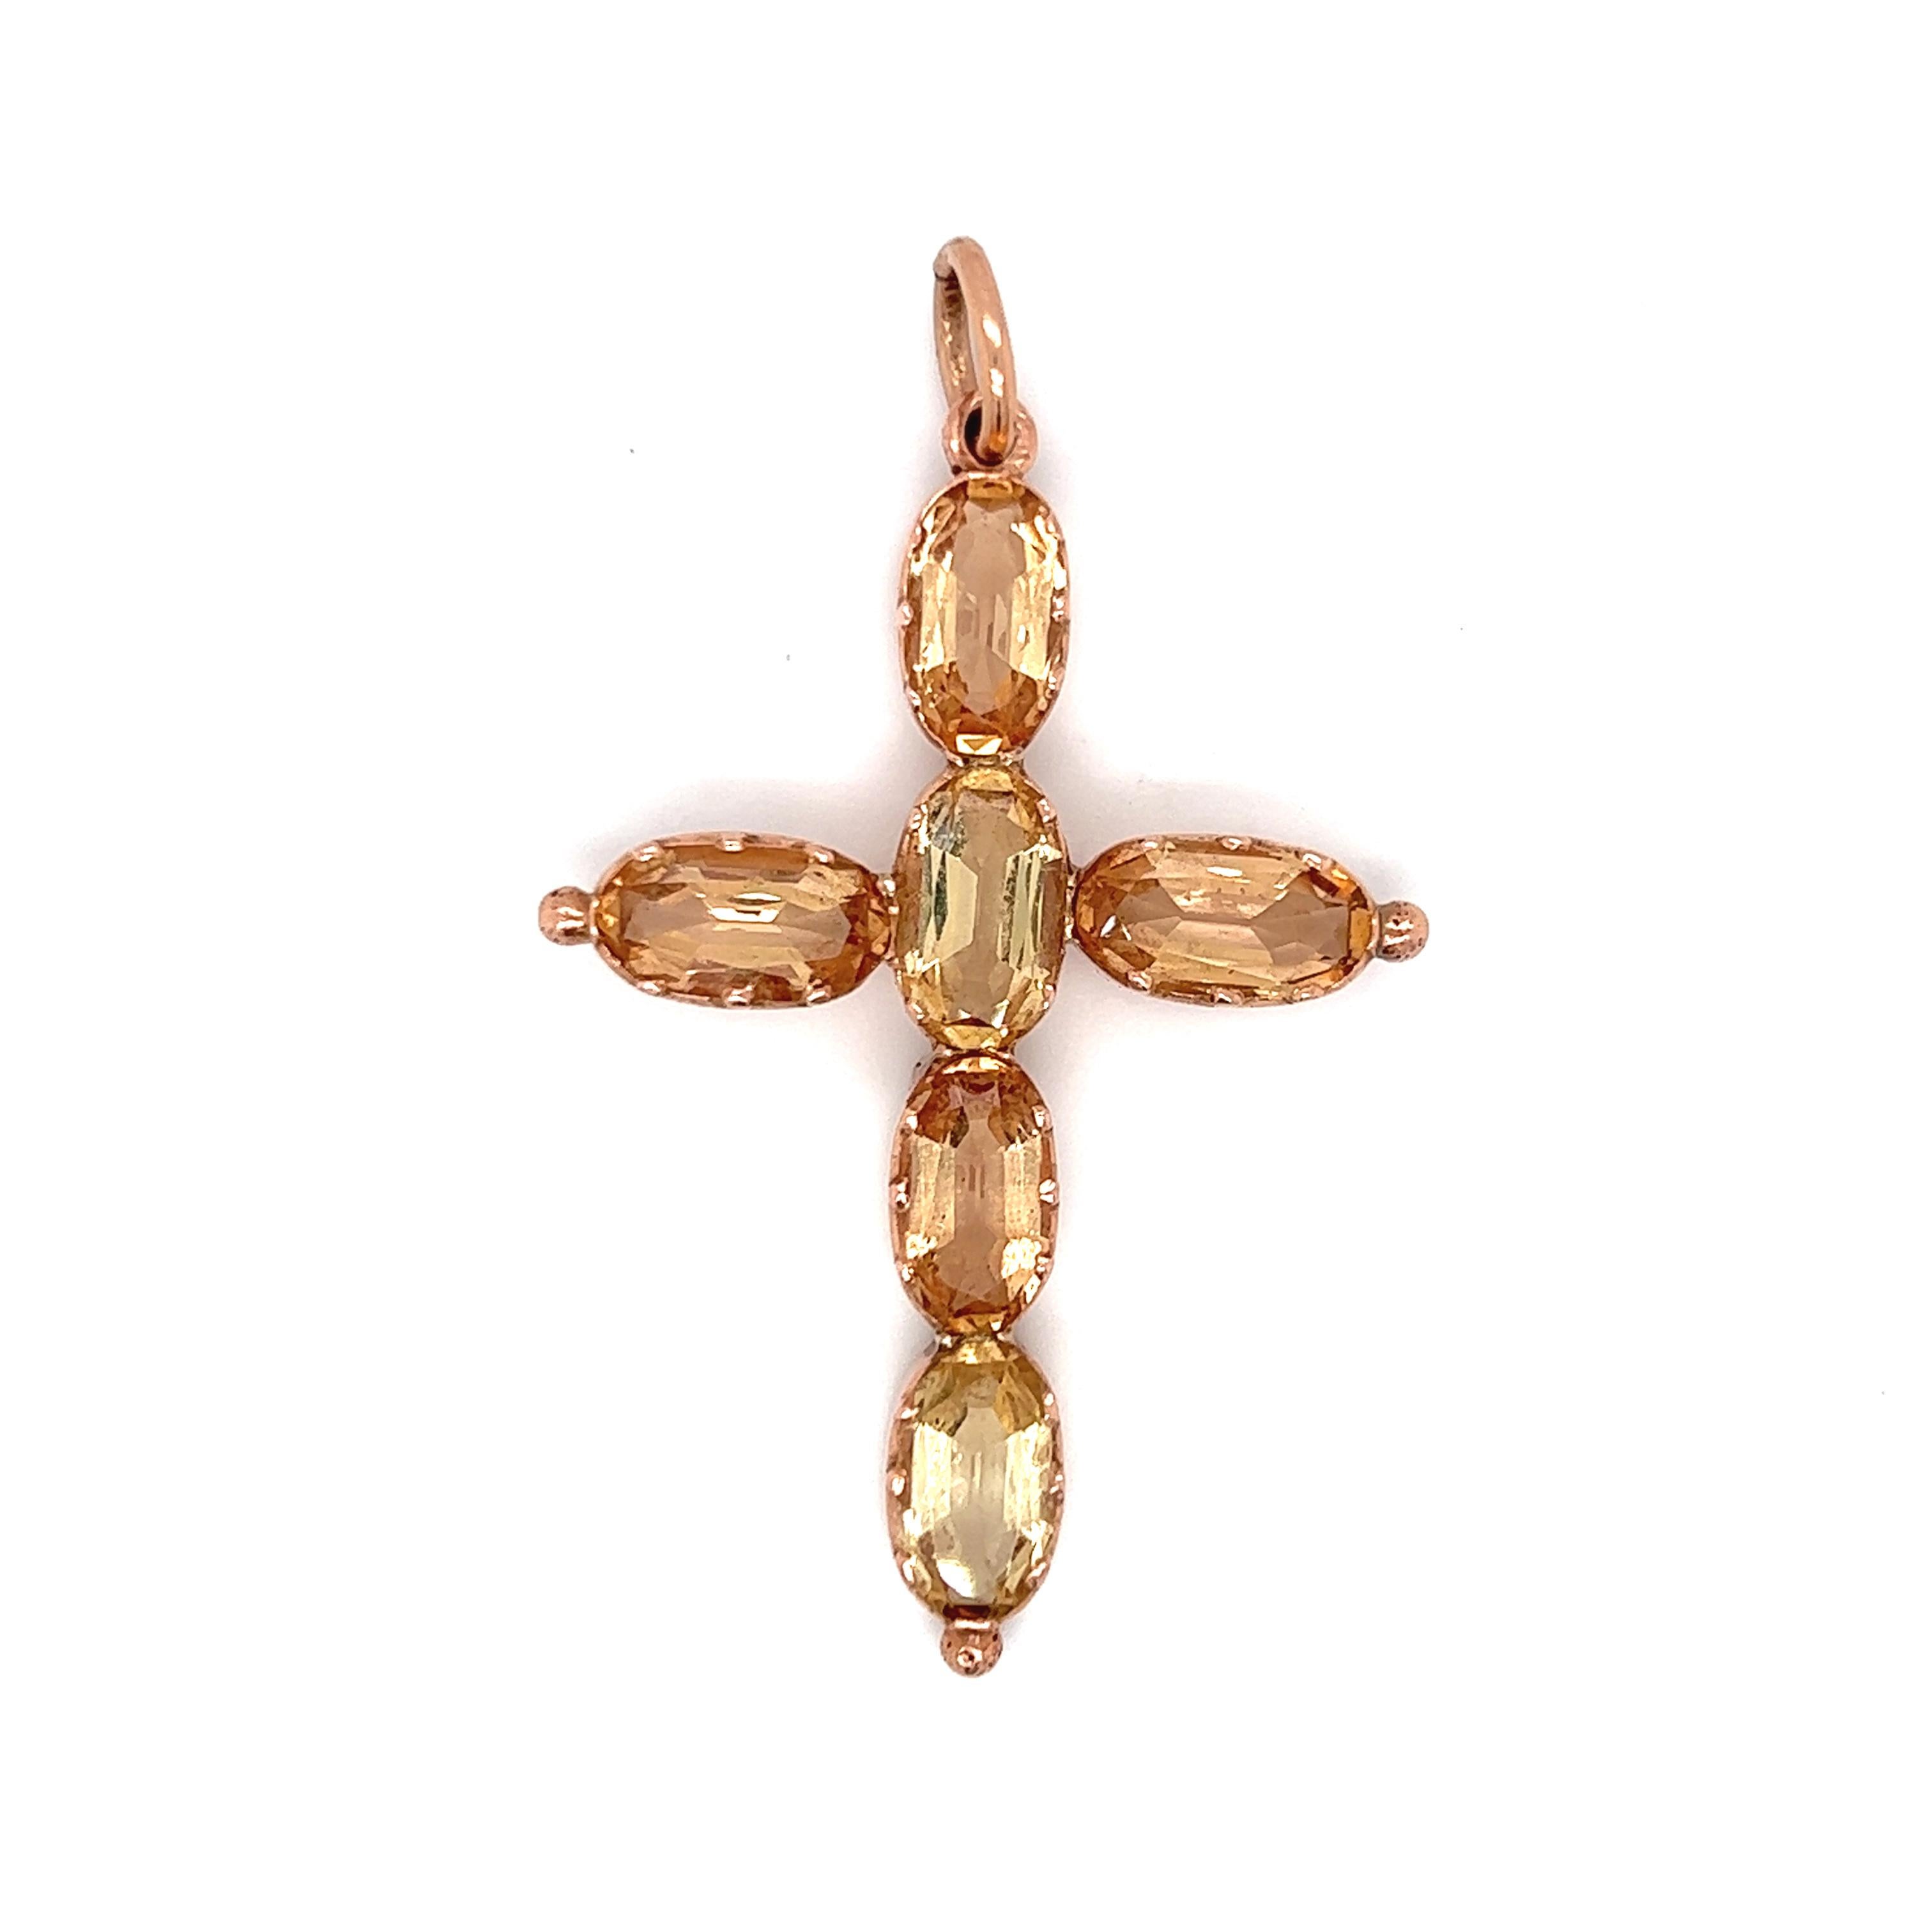 Immaculate and glistening imperial topaz faceted ovals are set in an uncomplicated rose gold cross shape. Beautiful, clean, and pure. Measures 2 1/2 x 1 1/4 inches.